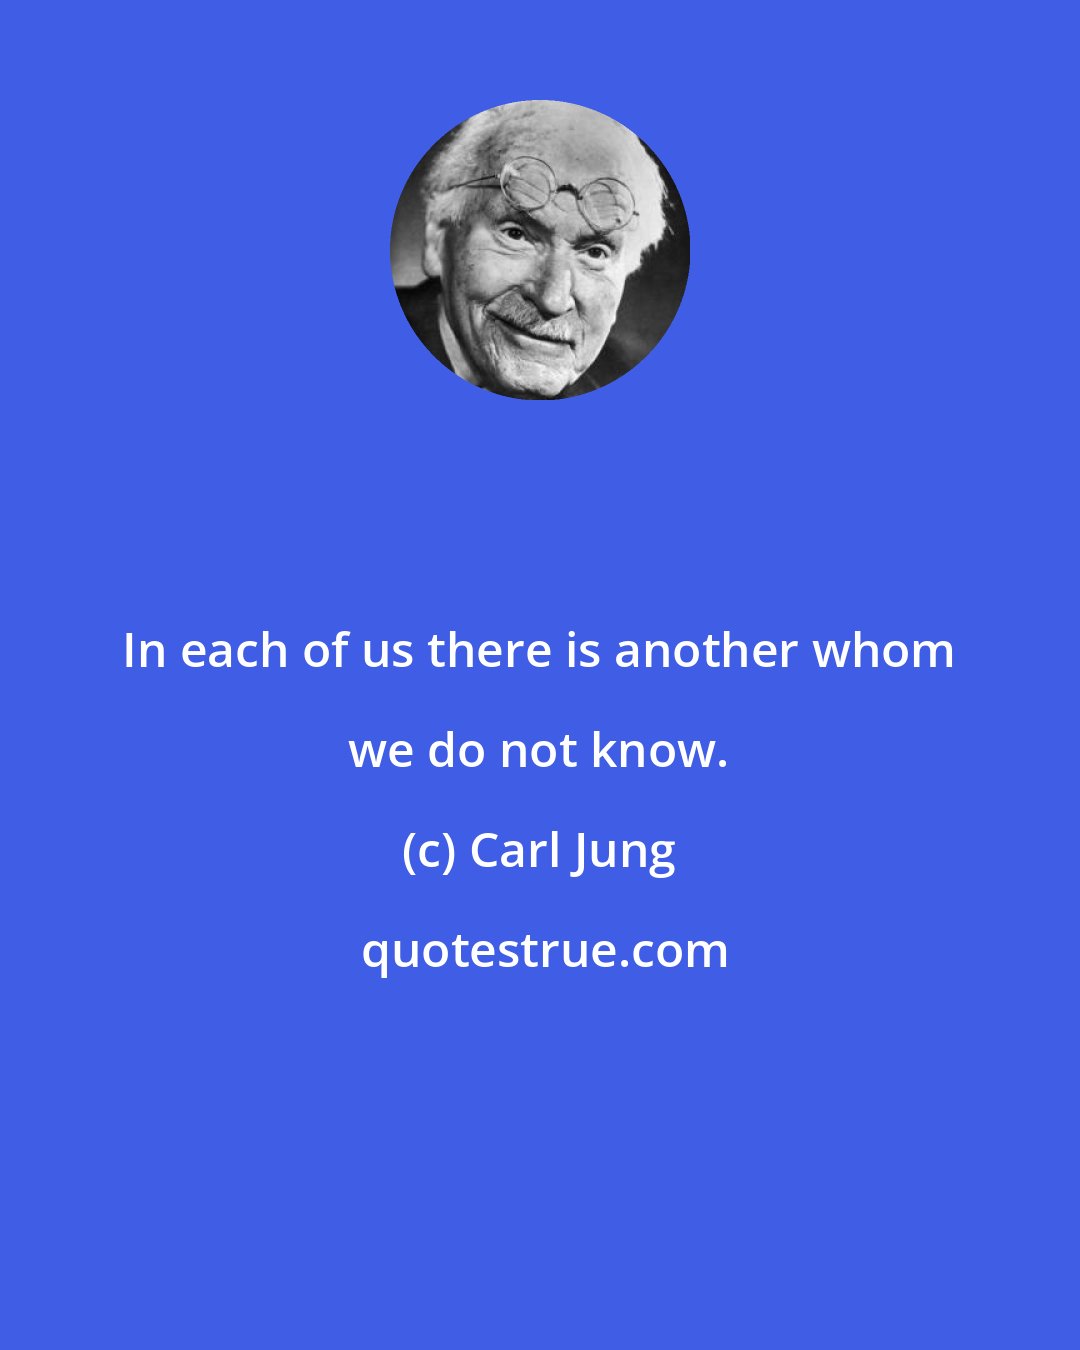 Carl Jung: In each of us there is another whom we do not know.